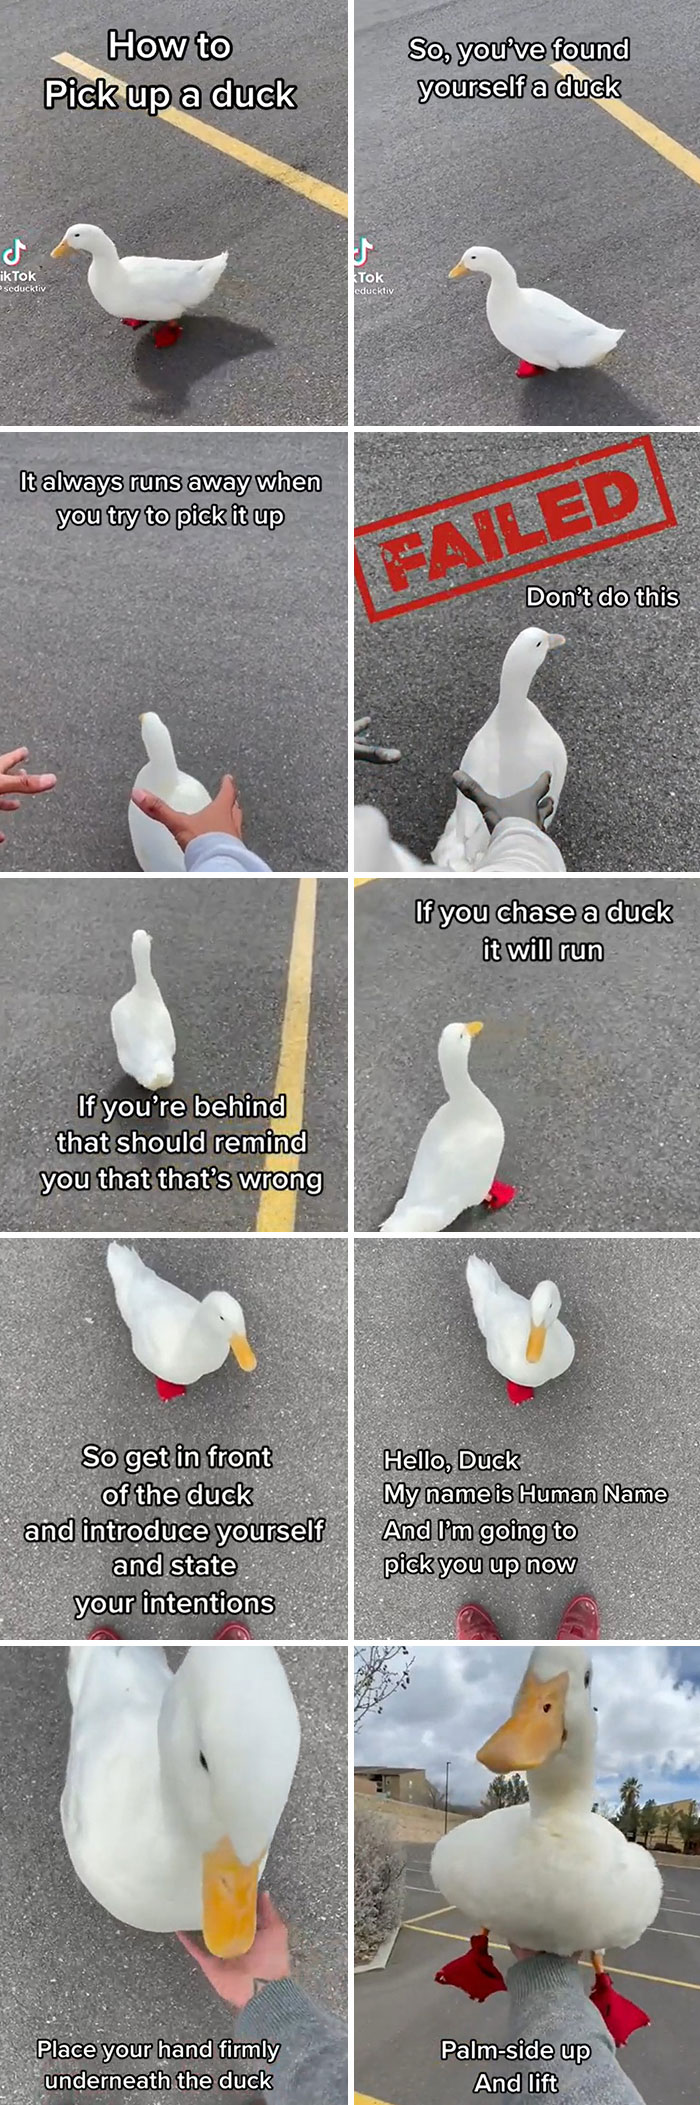 How To Pick Up A Duck